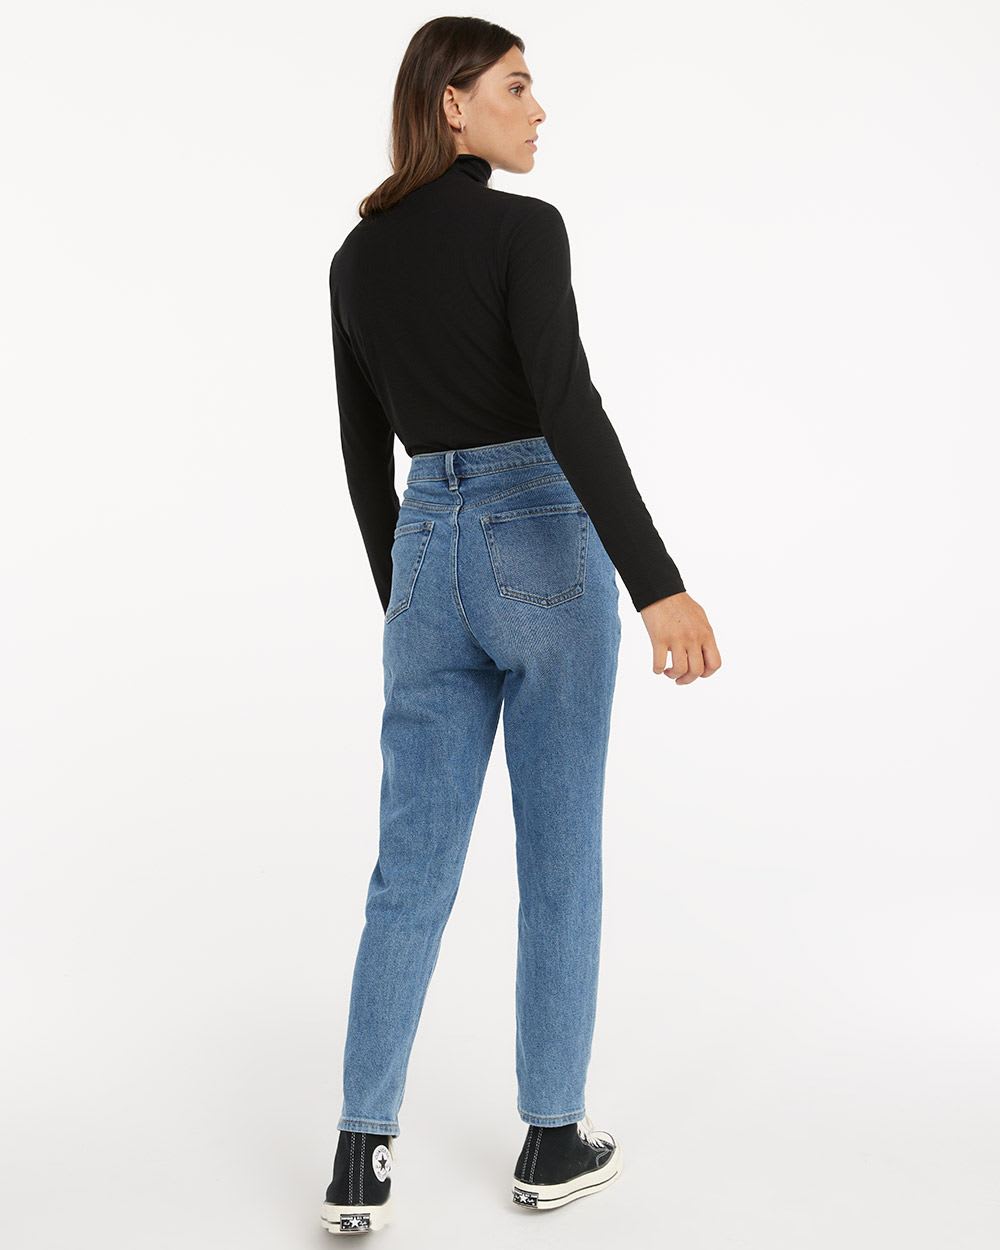 Super High-Rise Light Wash Jean, The Mom Jeans